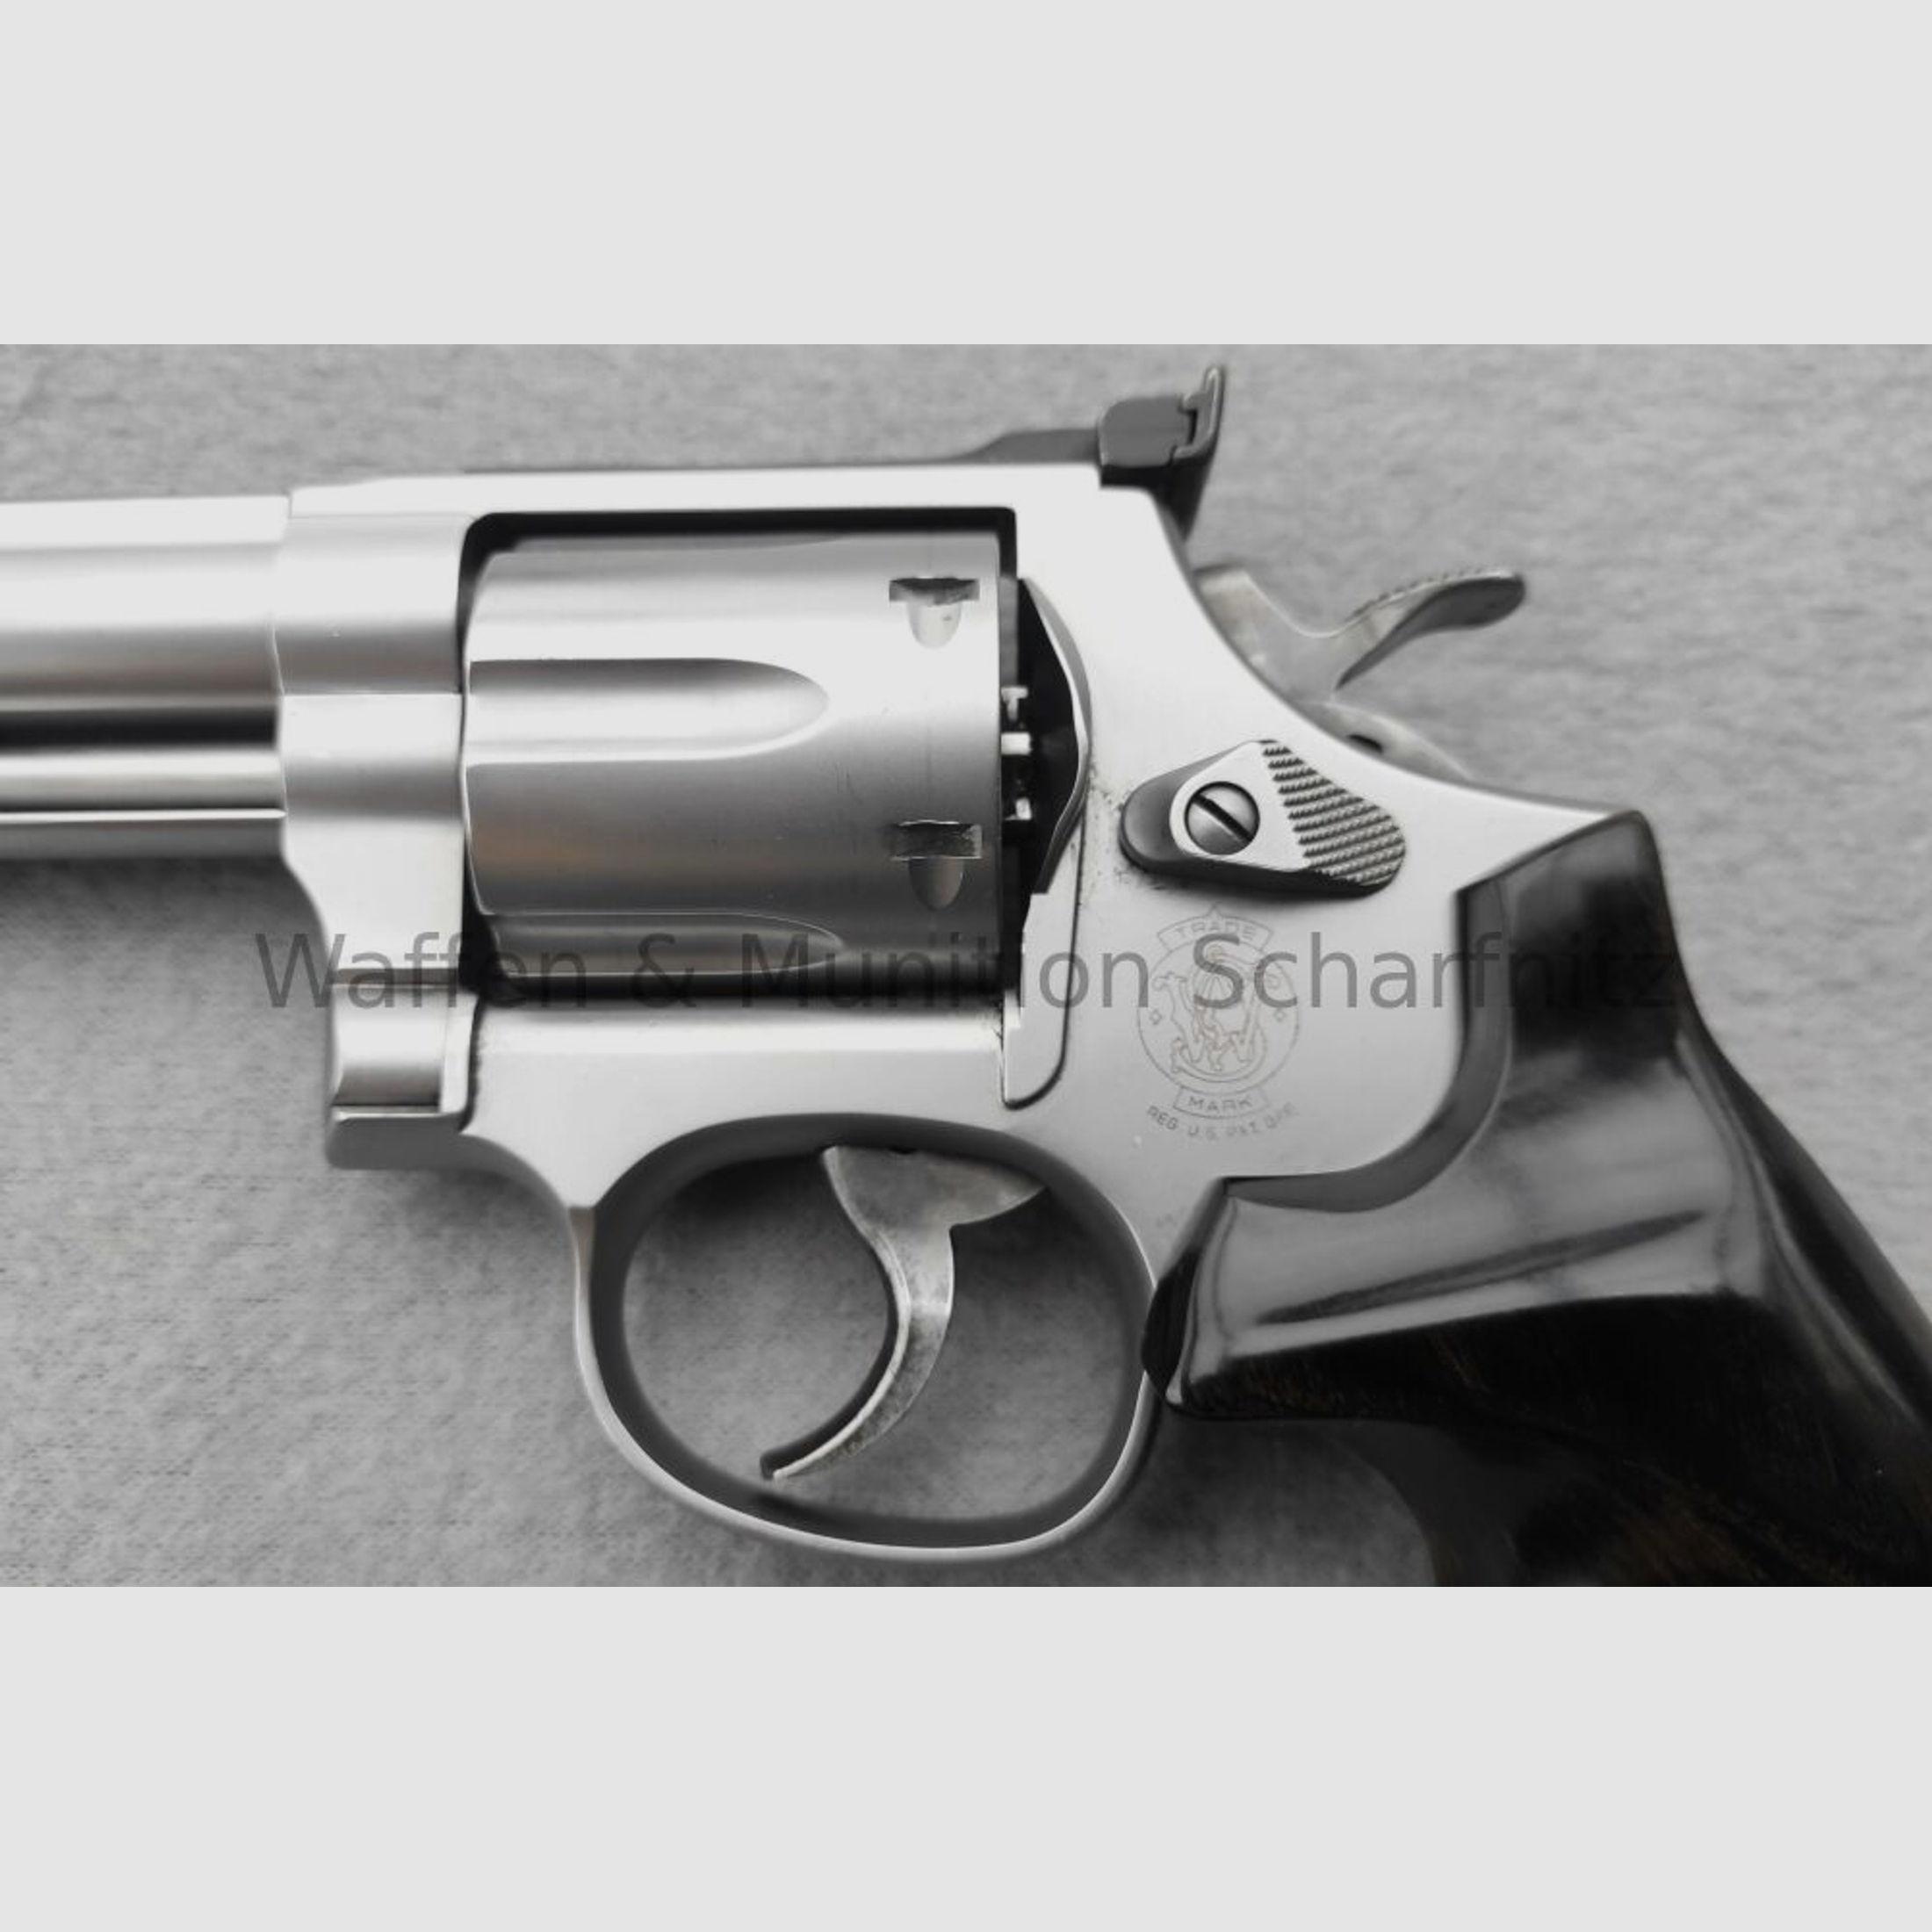 Smith & Wesson S&W	 686 Target Champion